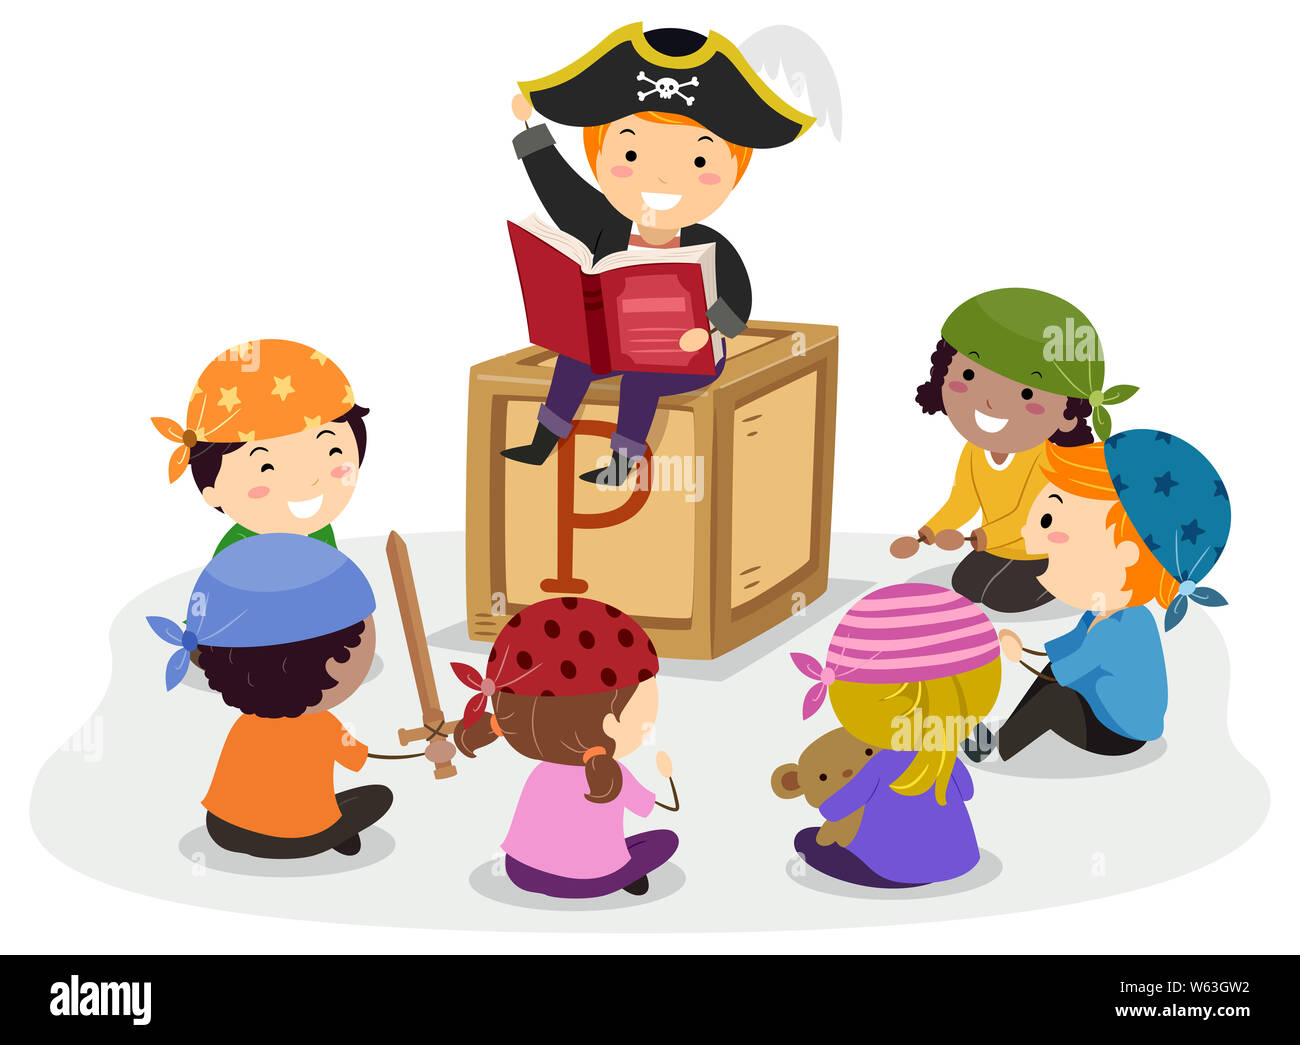 Illustration of Stickman Kids Wearing Pirate Costume with a Kid Boy Reading  a Book and Telling a Story Stock Photo - Alamy